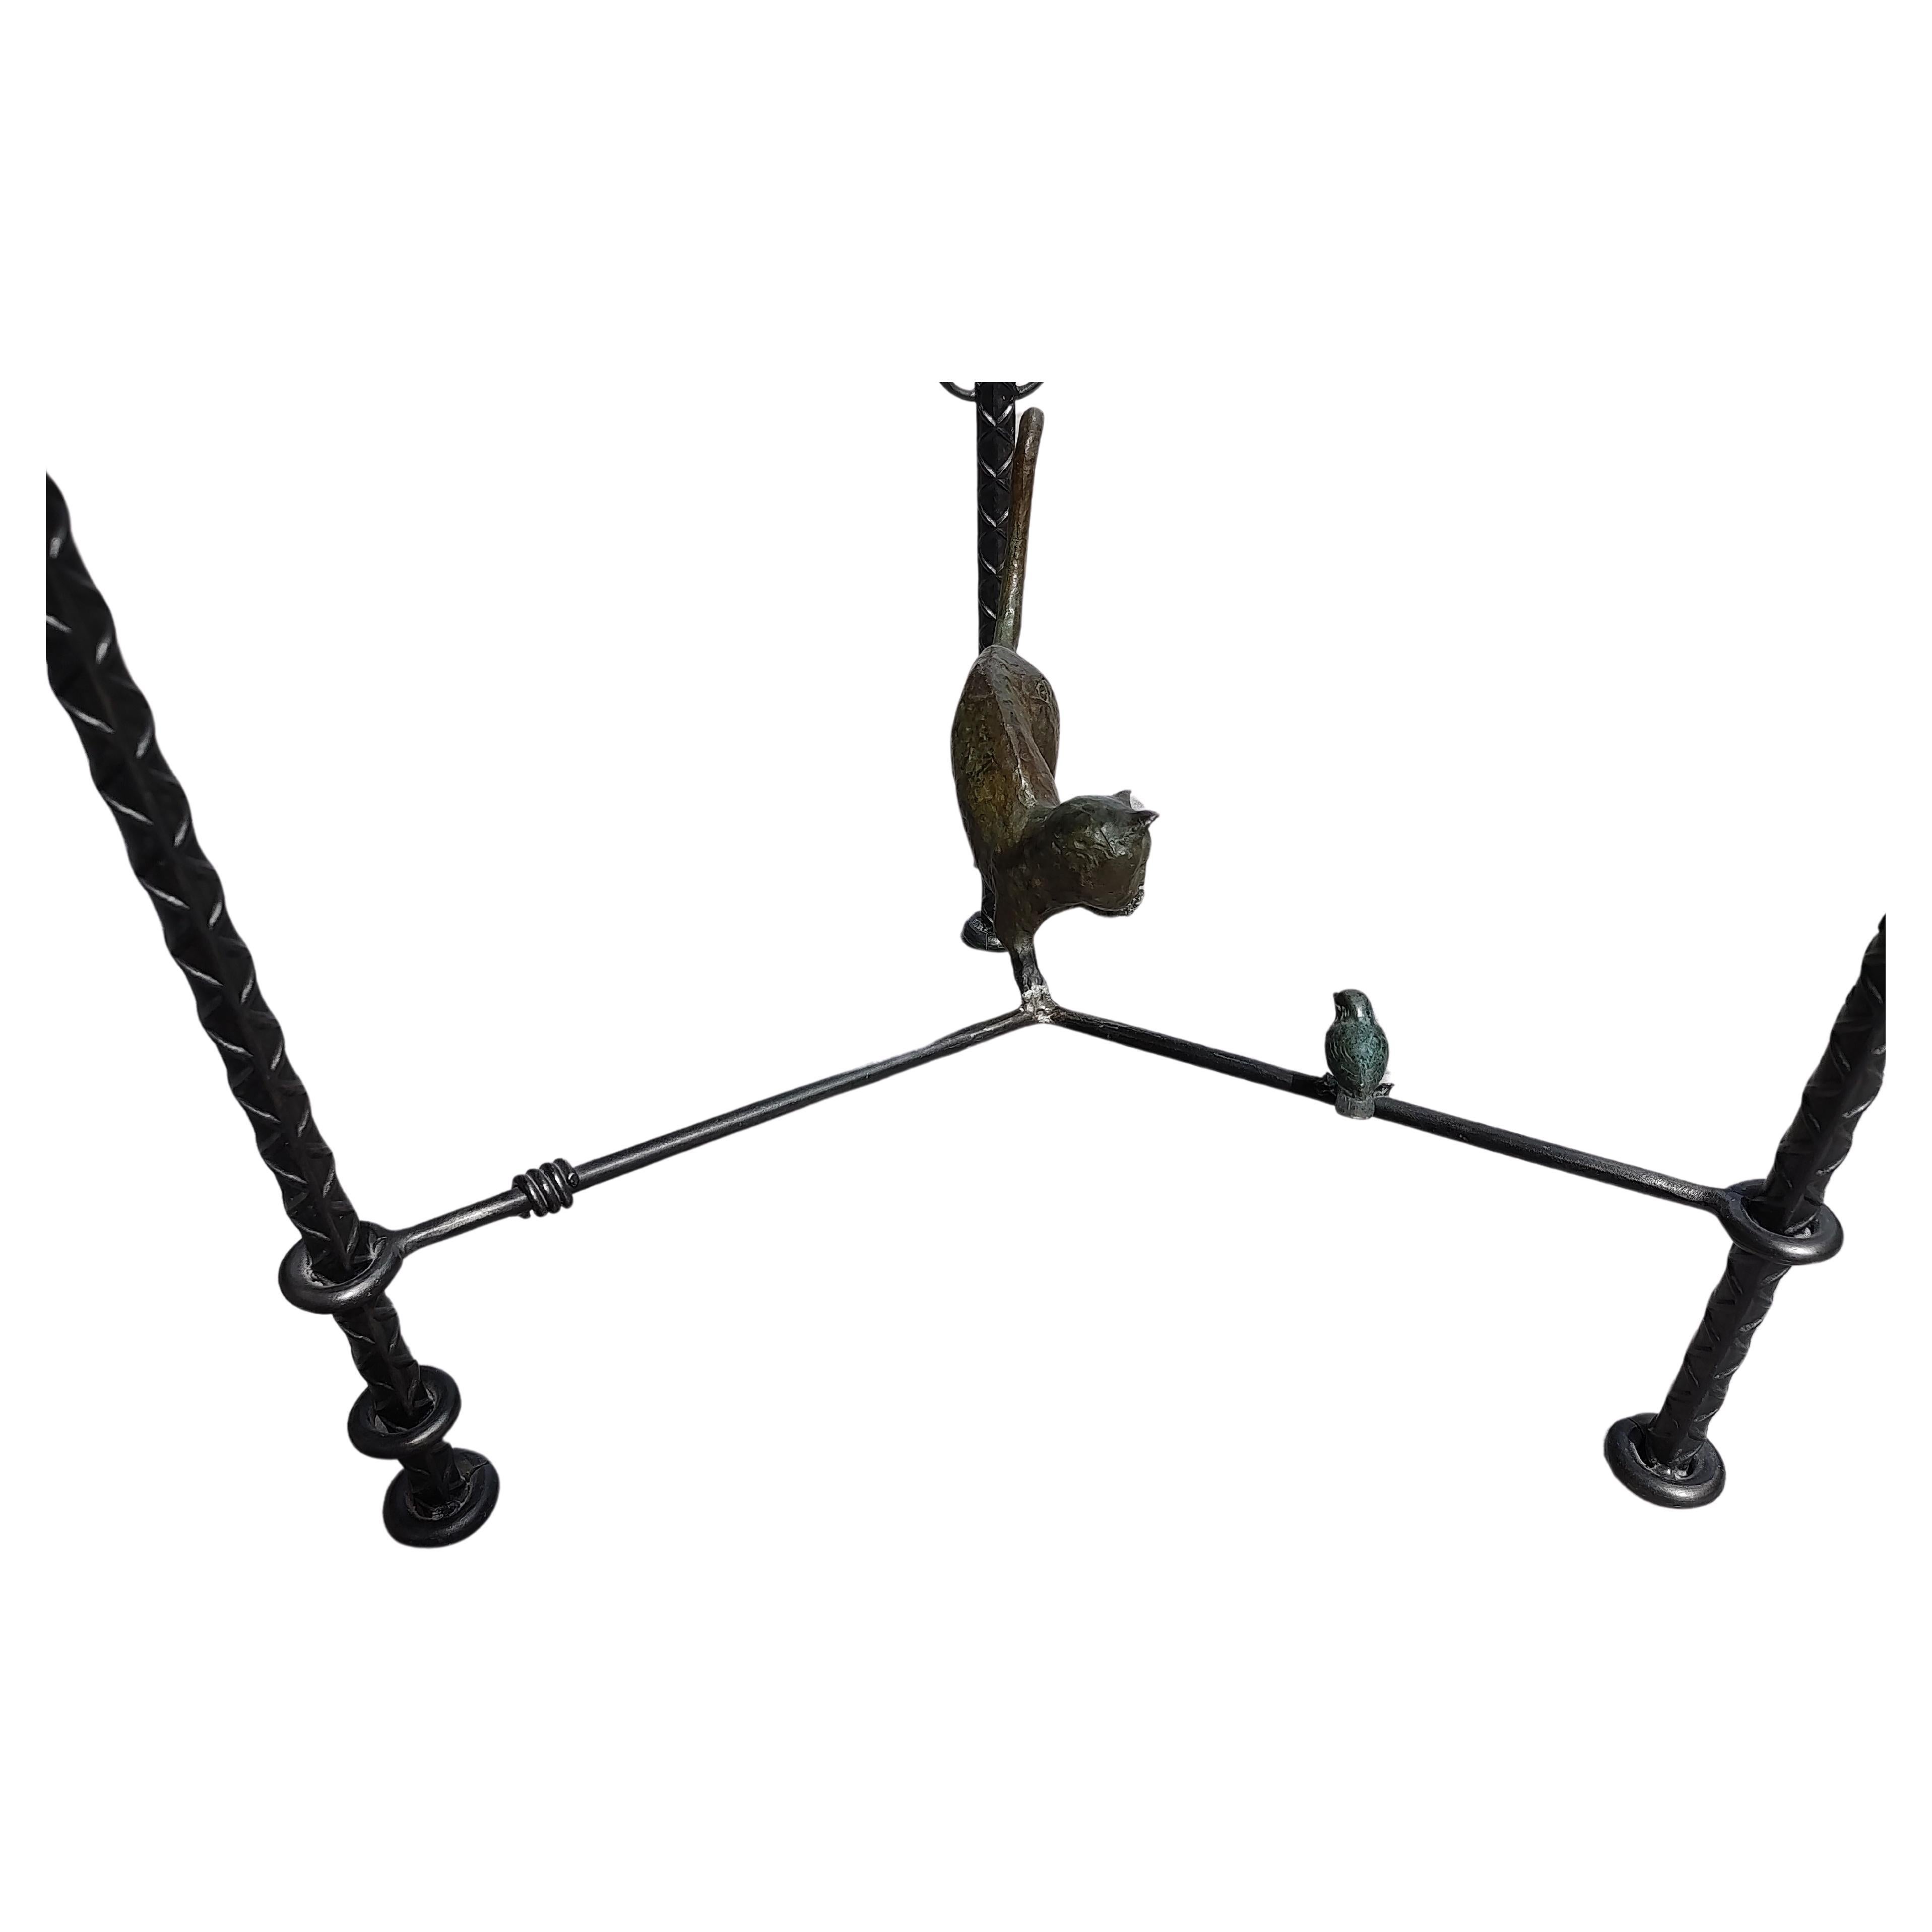 Fabulous cast bronze table by Ilana Goor an Israeli artist, with industrial rebar like legs in the style of Alberto & Diego Giacometti. A playful cat with a sparrow like bird sitting on the stretchers in Bronze. Signed and numbered, 39/100. In